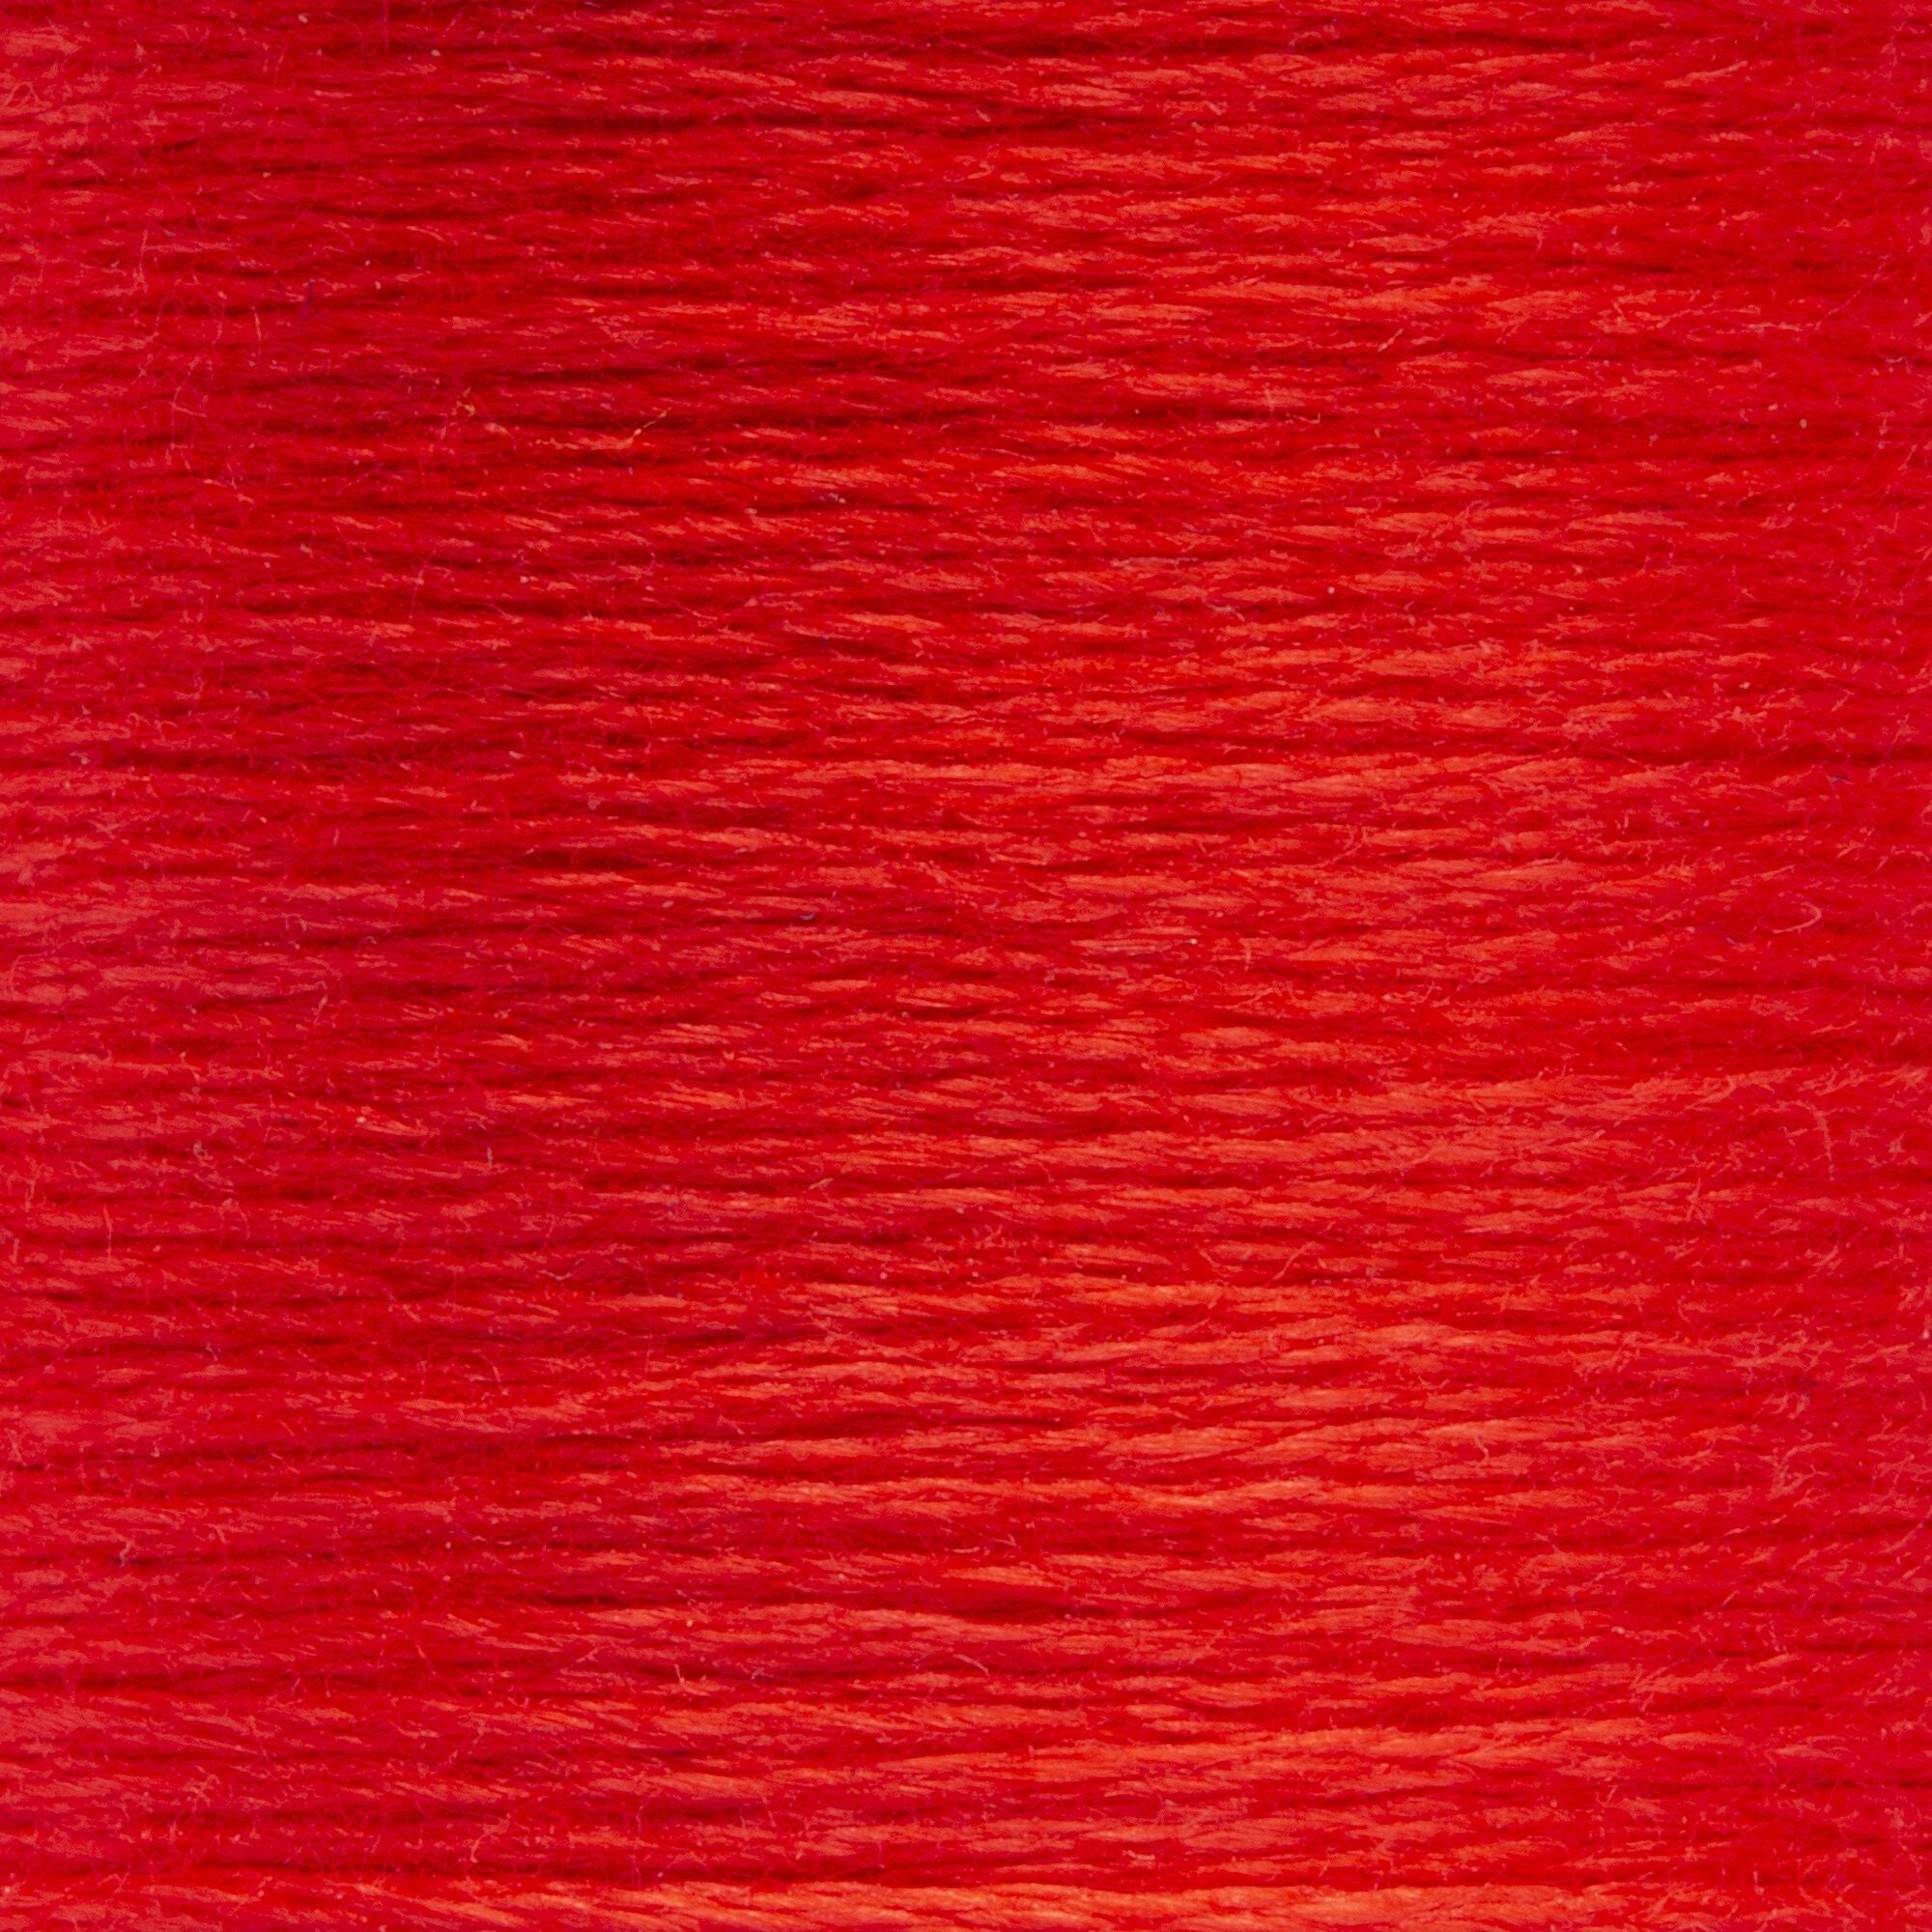 Anchor Embroidery Floss in Crimson Red Lt